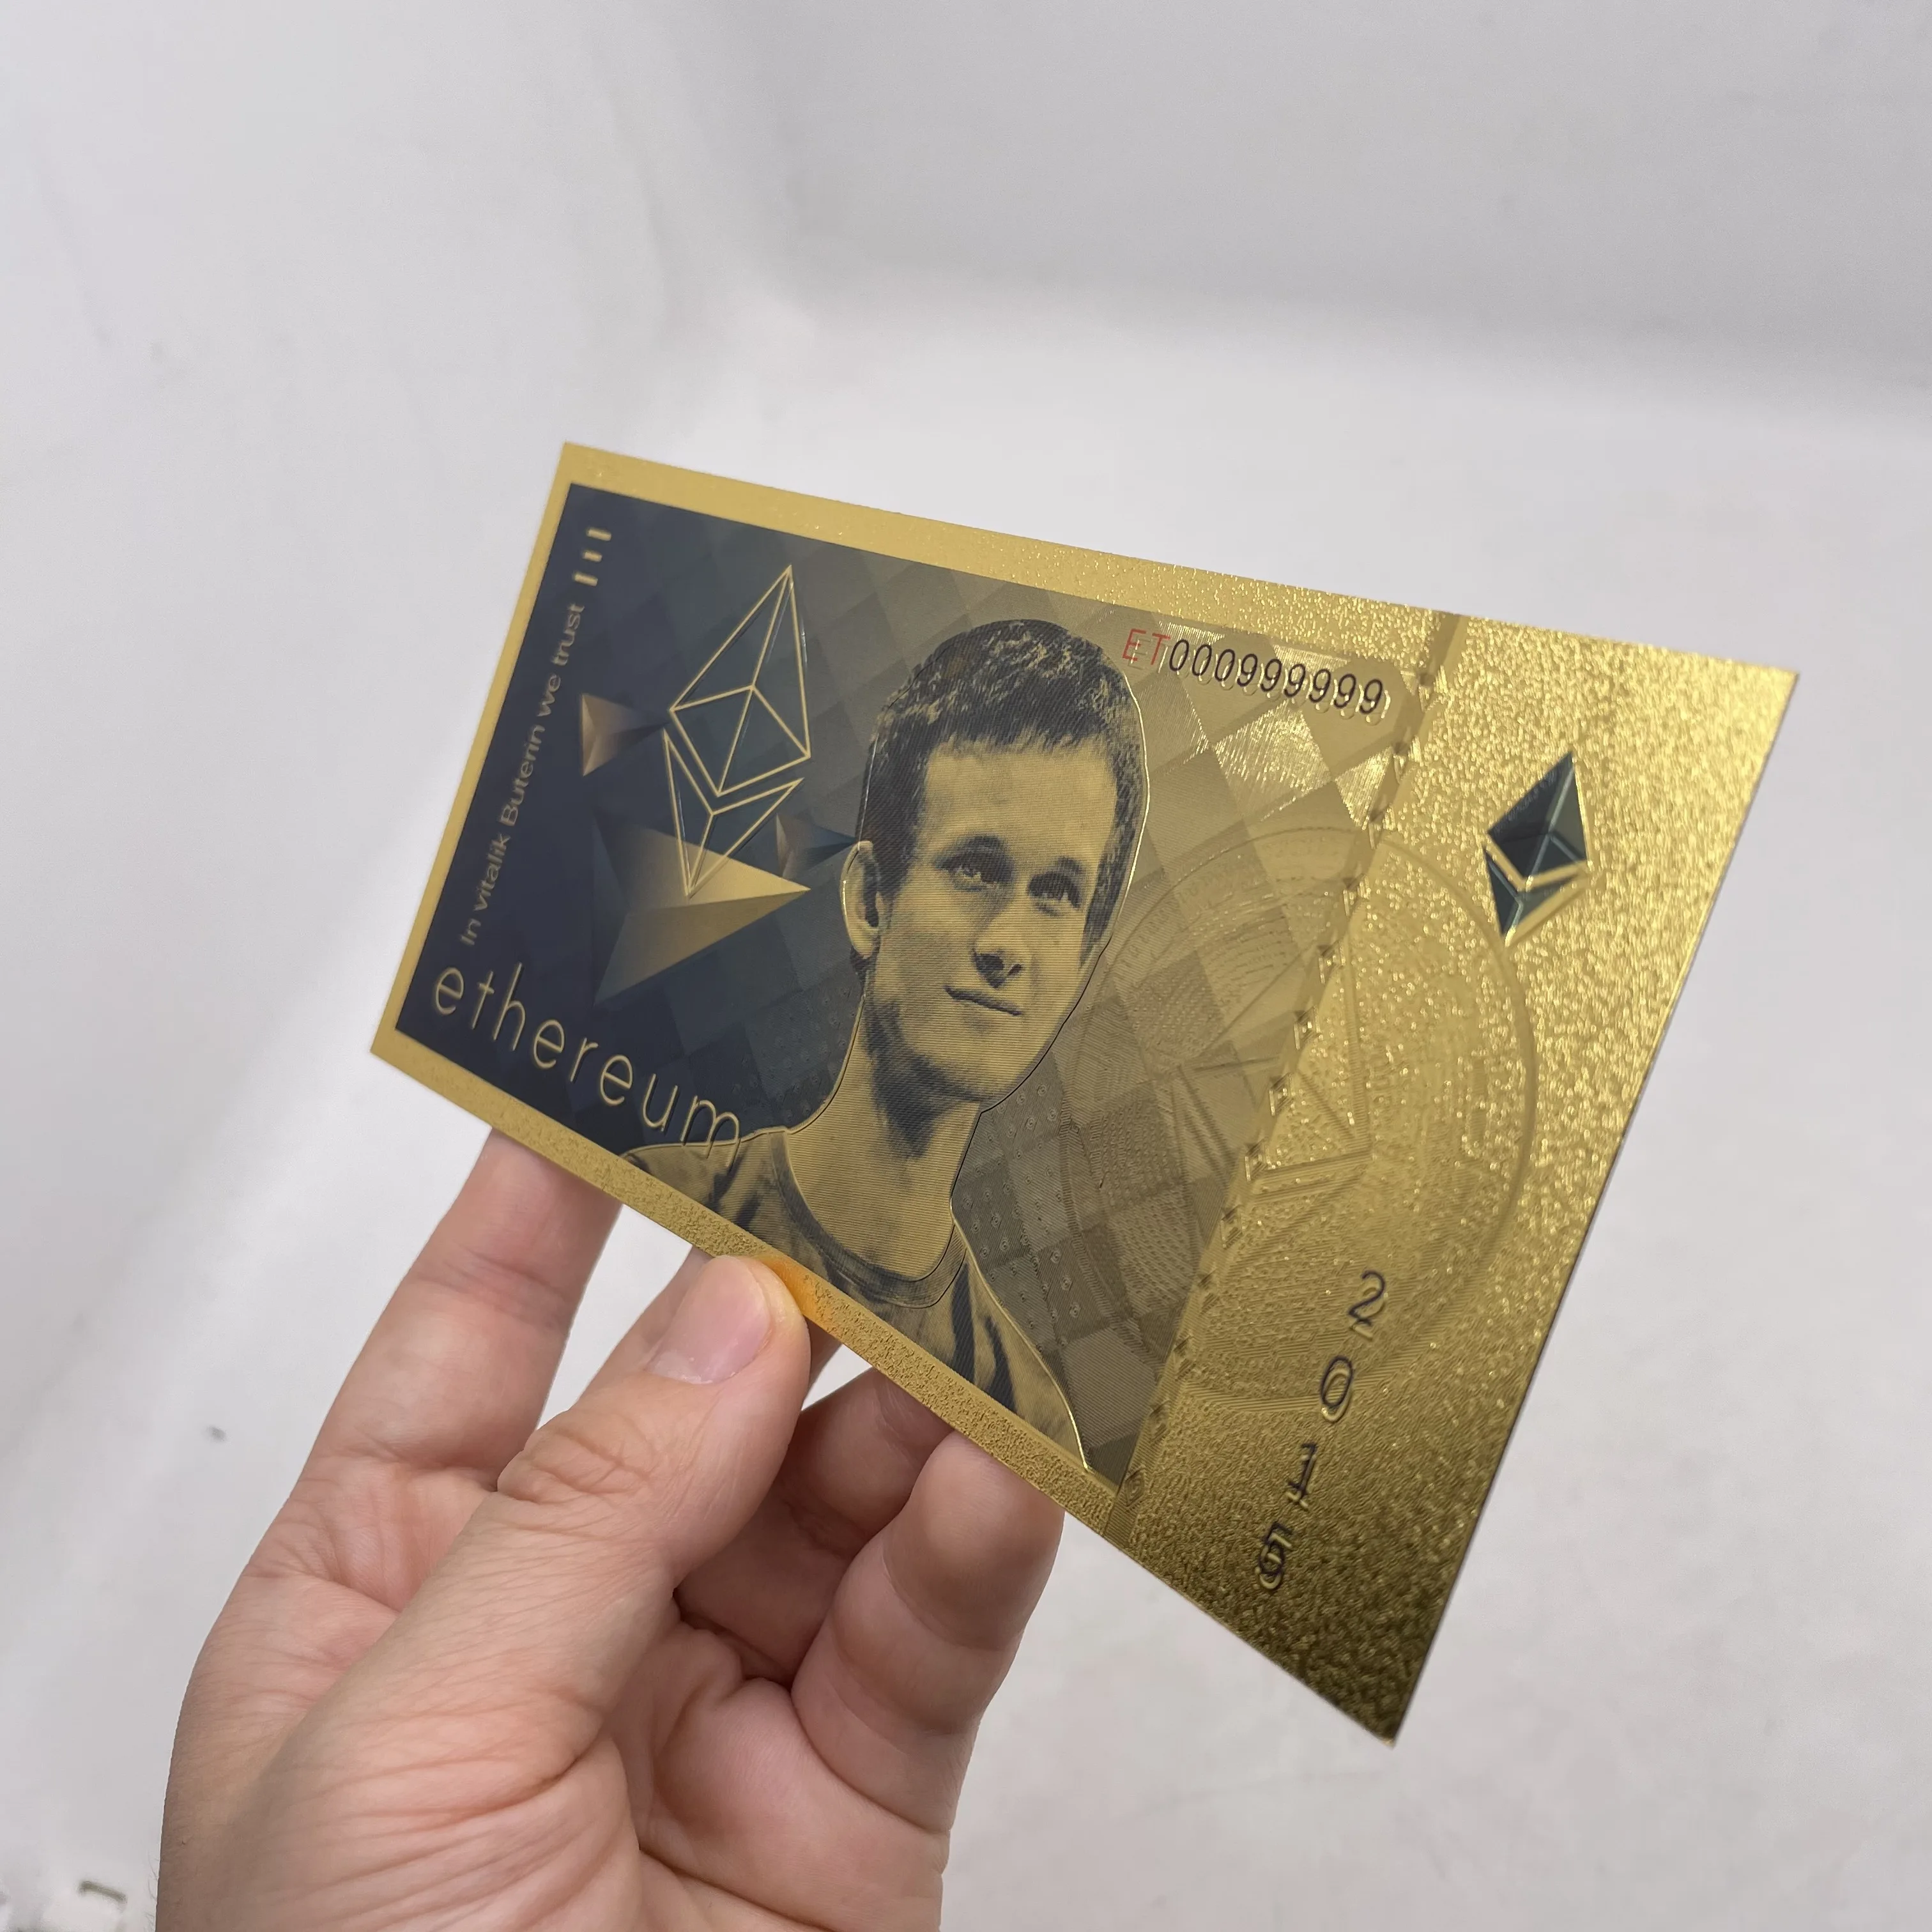 

2021 NEW Beautiful TH Ethereum Vitalik Buterin Gold Color Banknote Physical Commemorative BTC Crypto Coin Ticket for Great Gift